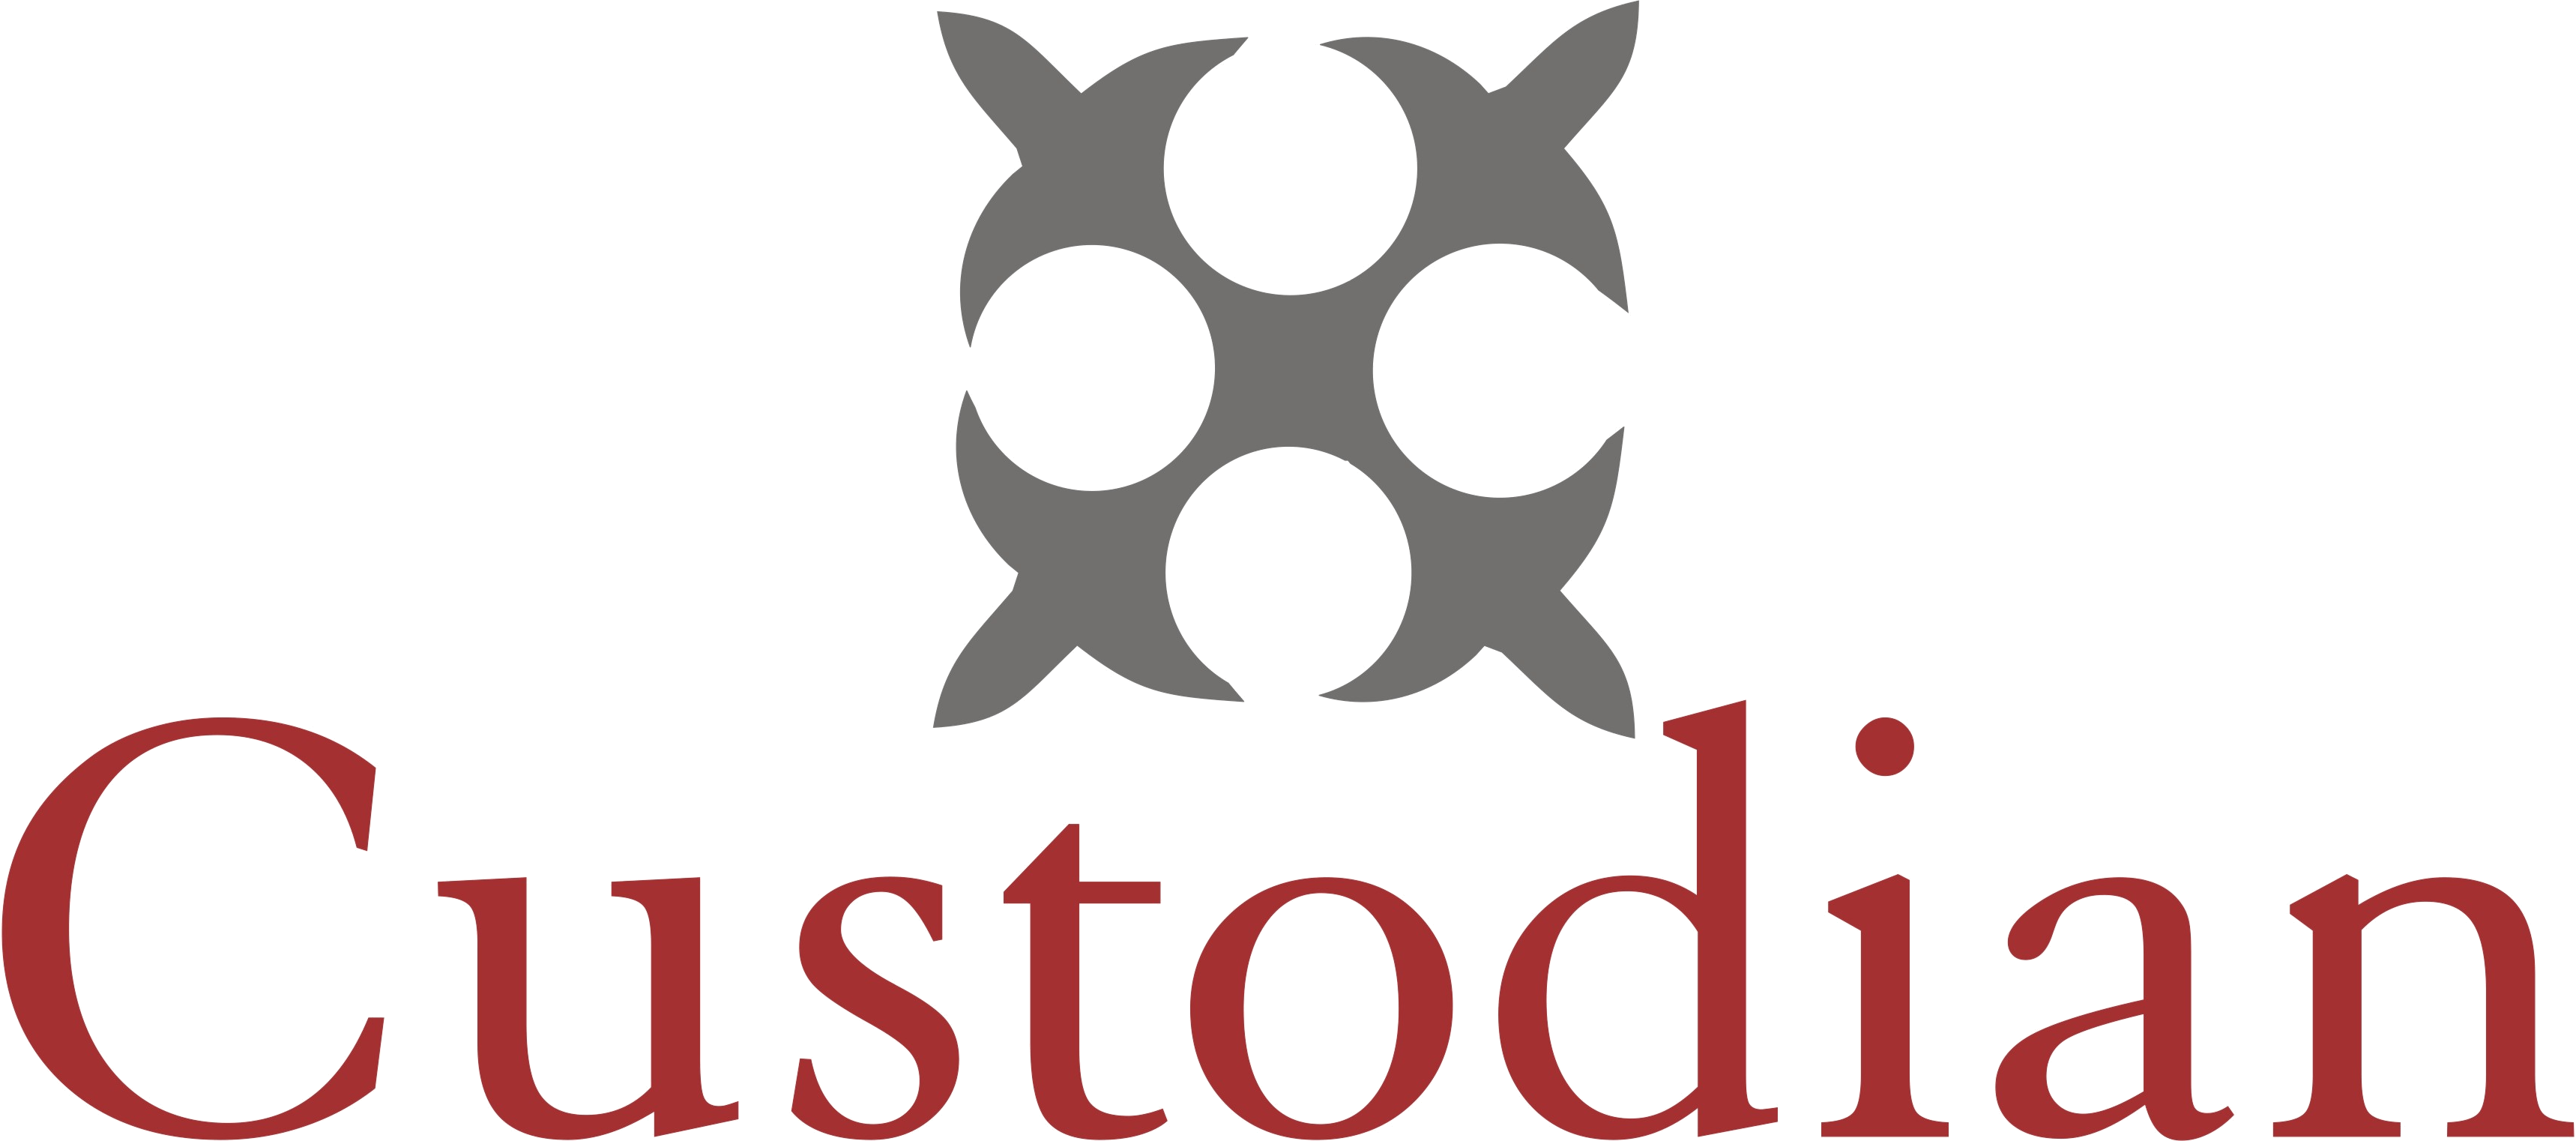 Custodian Logo - Vehicle Insurance - Third Party Insurance and Allied